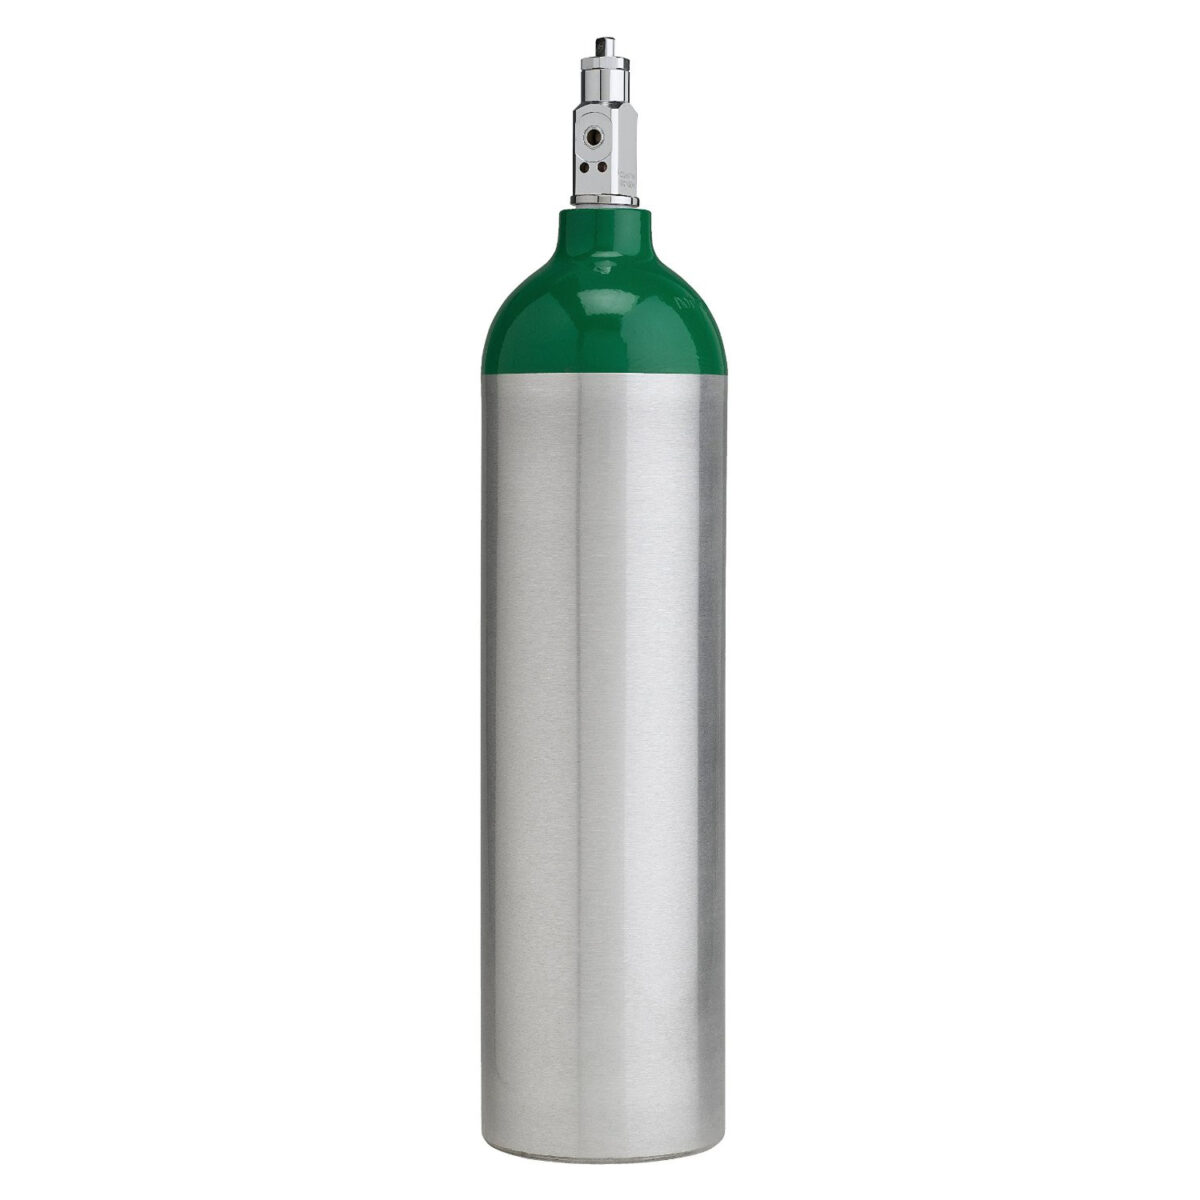 lightning x medical oxygen cylinder d med for breathing treatment, cpr and first aid